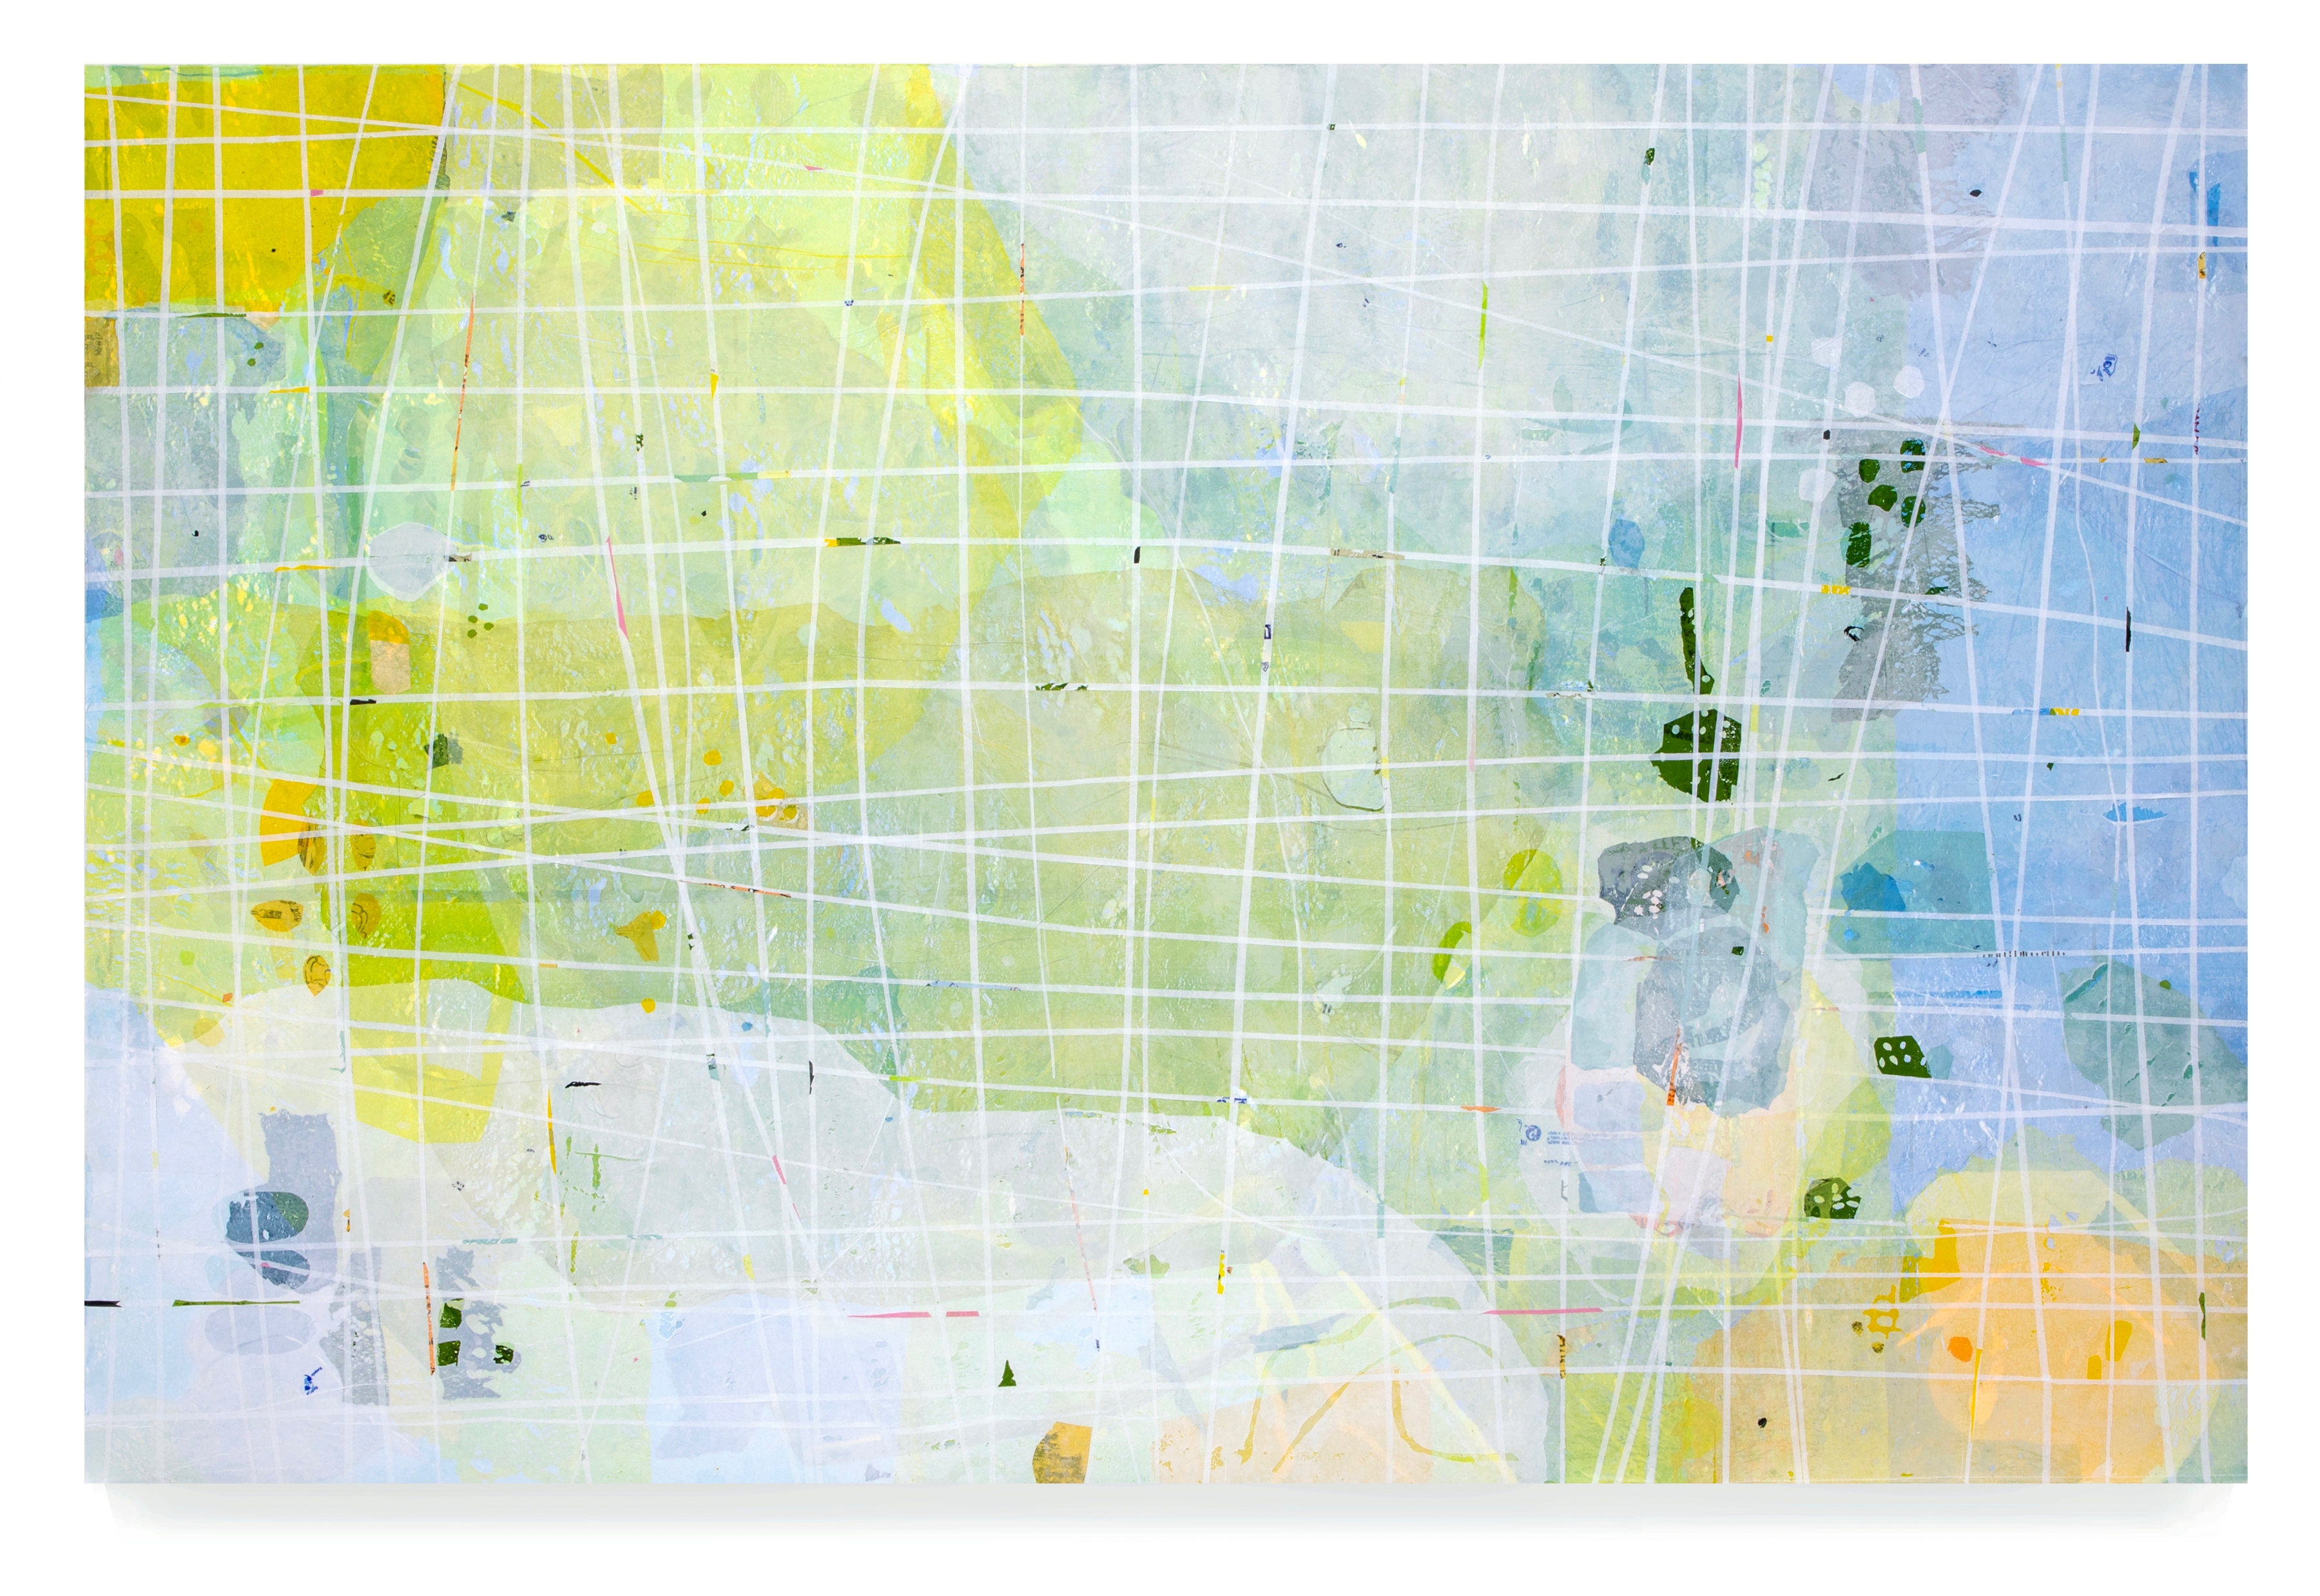 bundled truths, 2020
single use plastic mounted on panel
55 x 84 inches (139.7 x 213.4 cm) HM-312
&nbsp;